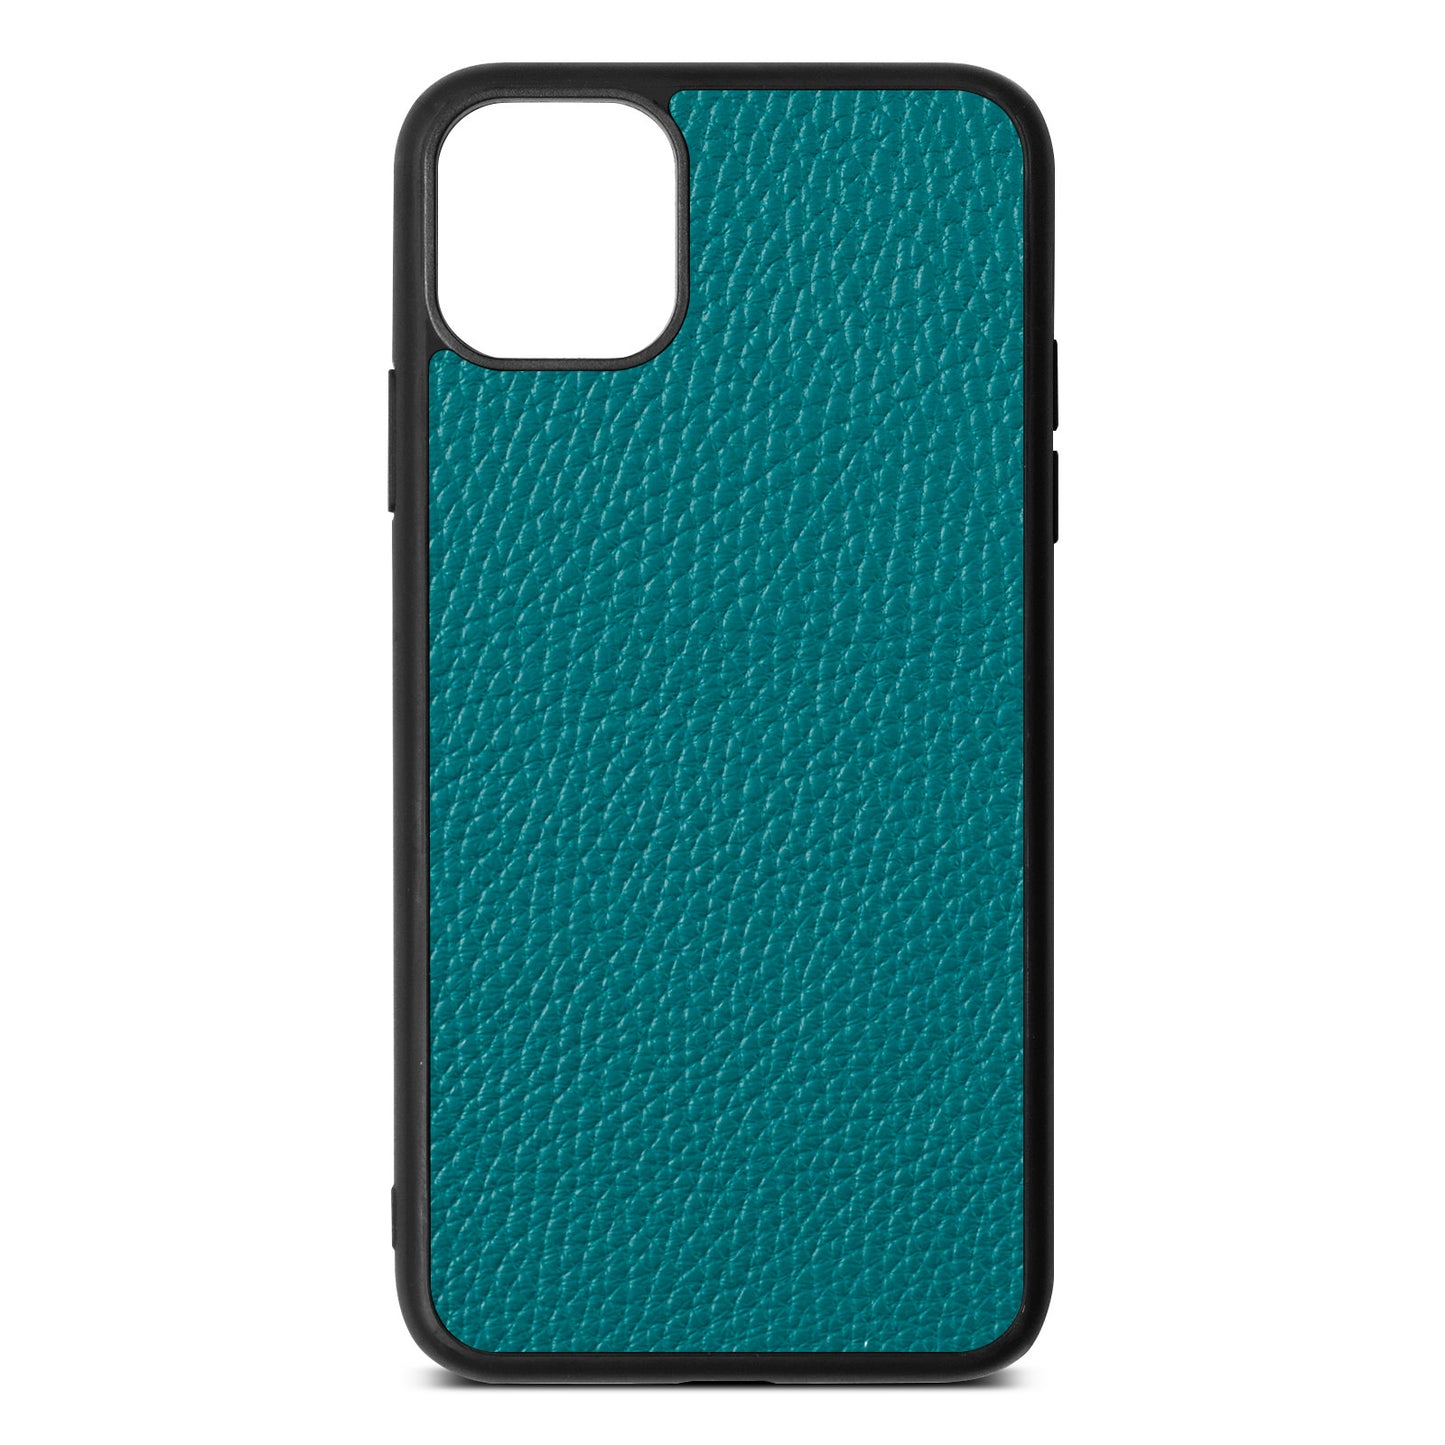 Blank iPhone 11 Pro Max Pebble Green Leather iPhone Case